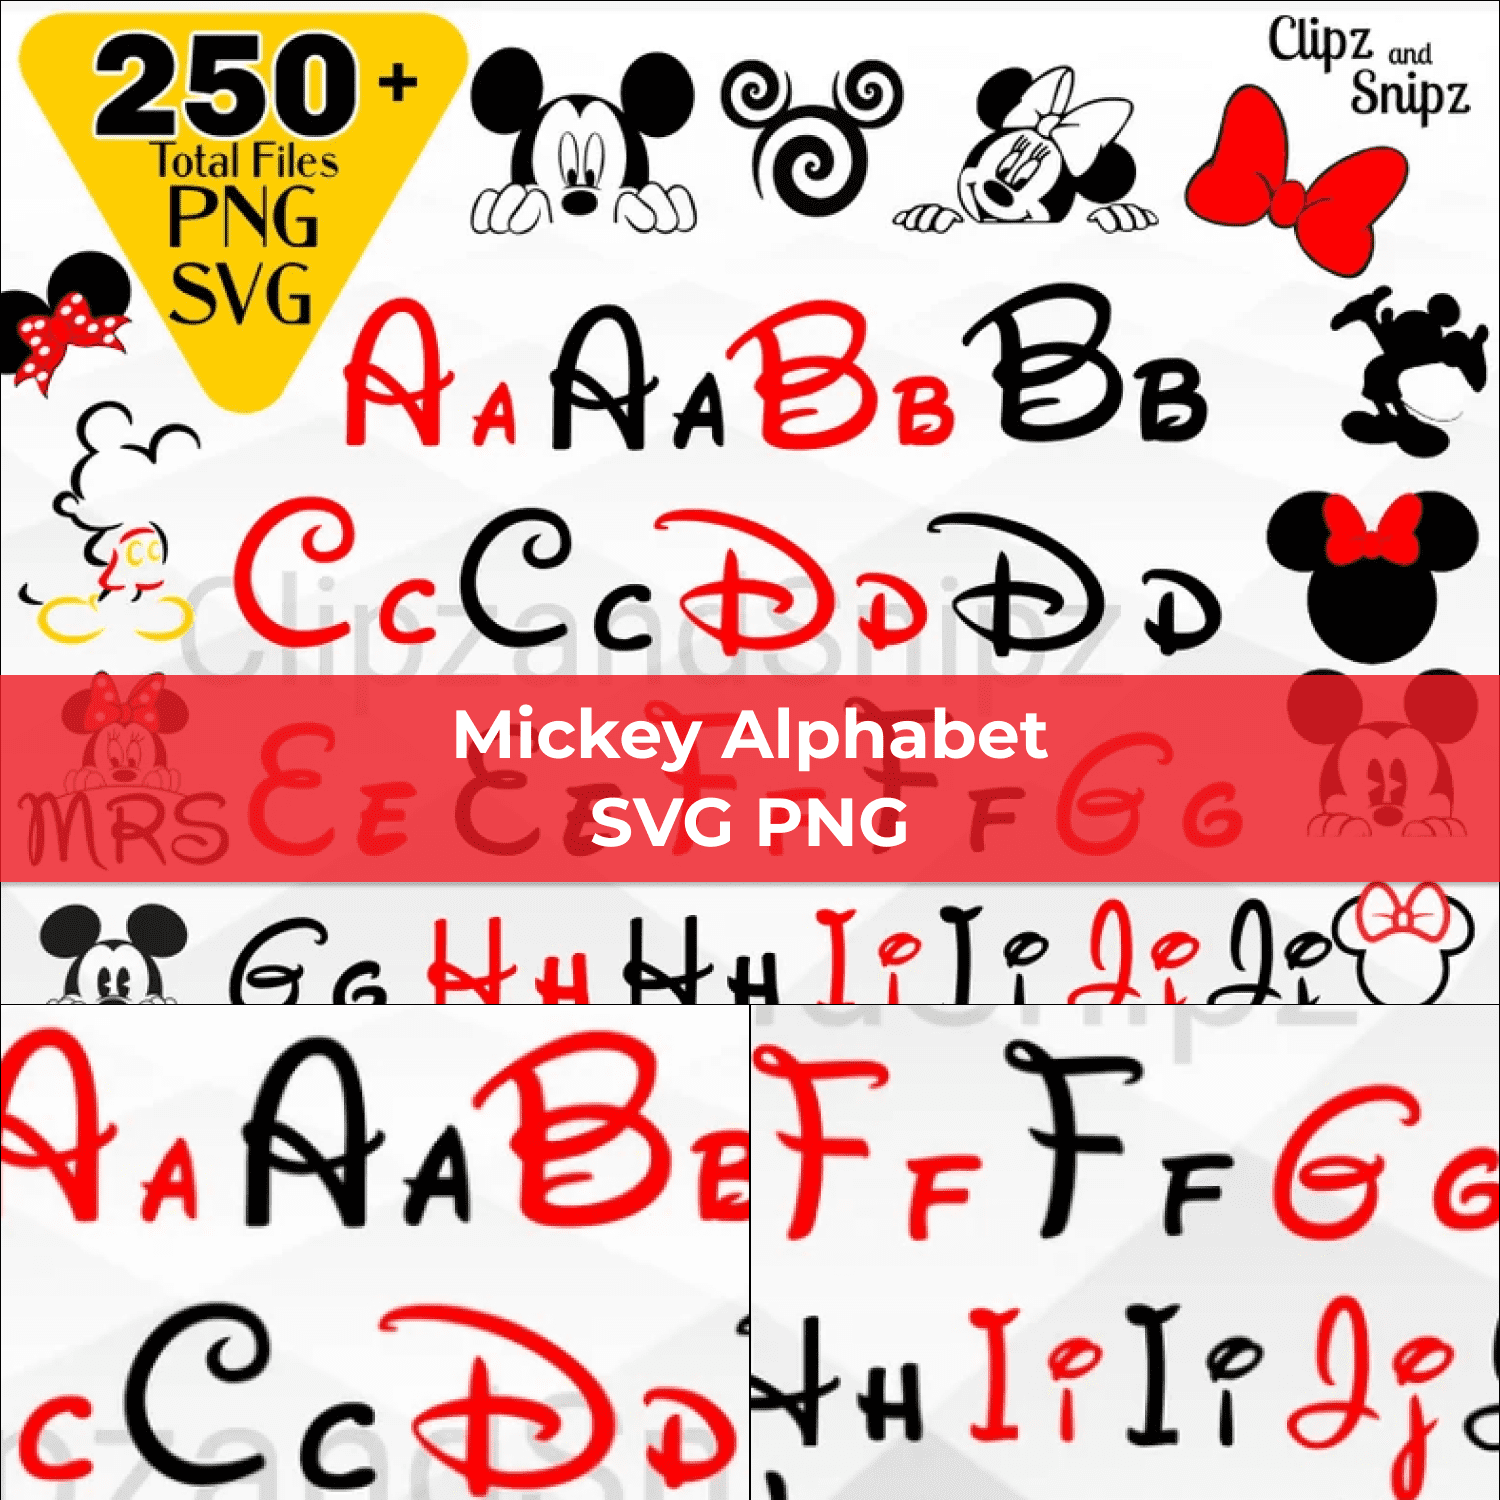 Mickey Alphabet SVG PNG Clipart.